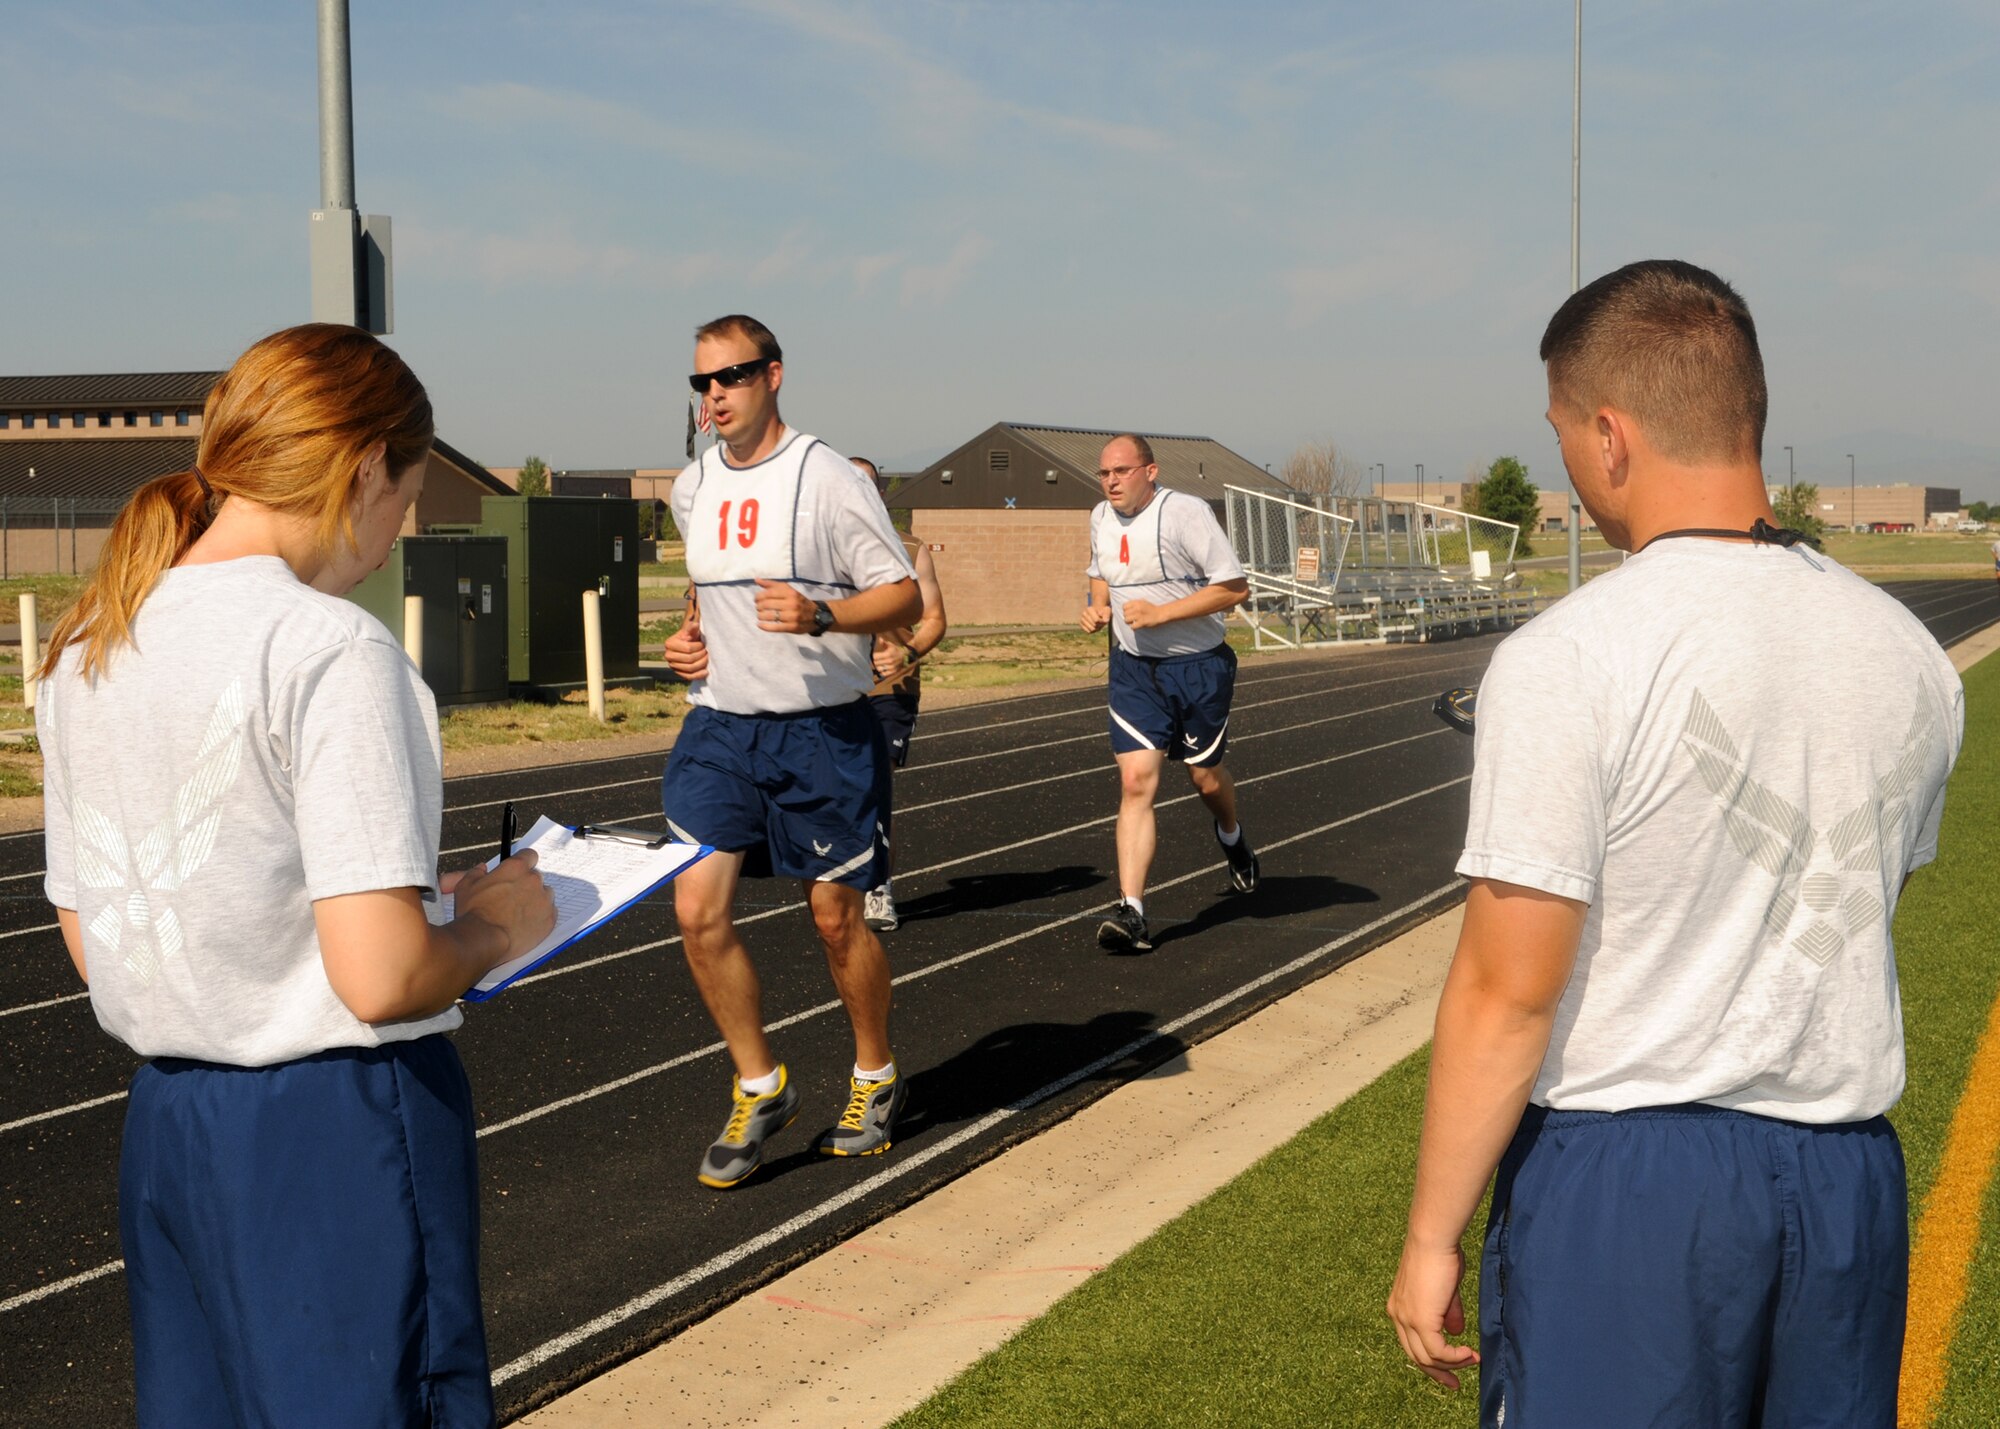 BUCKLEY AIR FORCE BASE, Colo. --Members of Team Buckley run the mile and a half portion of their physical training test July 13, 2012. Physical training leaders assumed the role of administering PT tests.(U.S.Air Force photo by Senior Airman Marcy Glass)